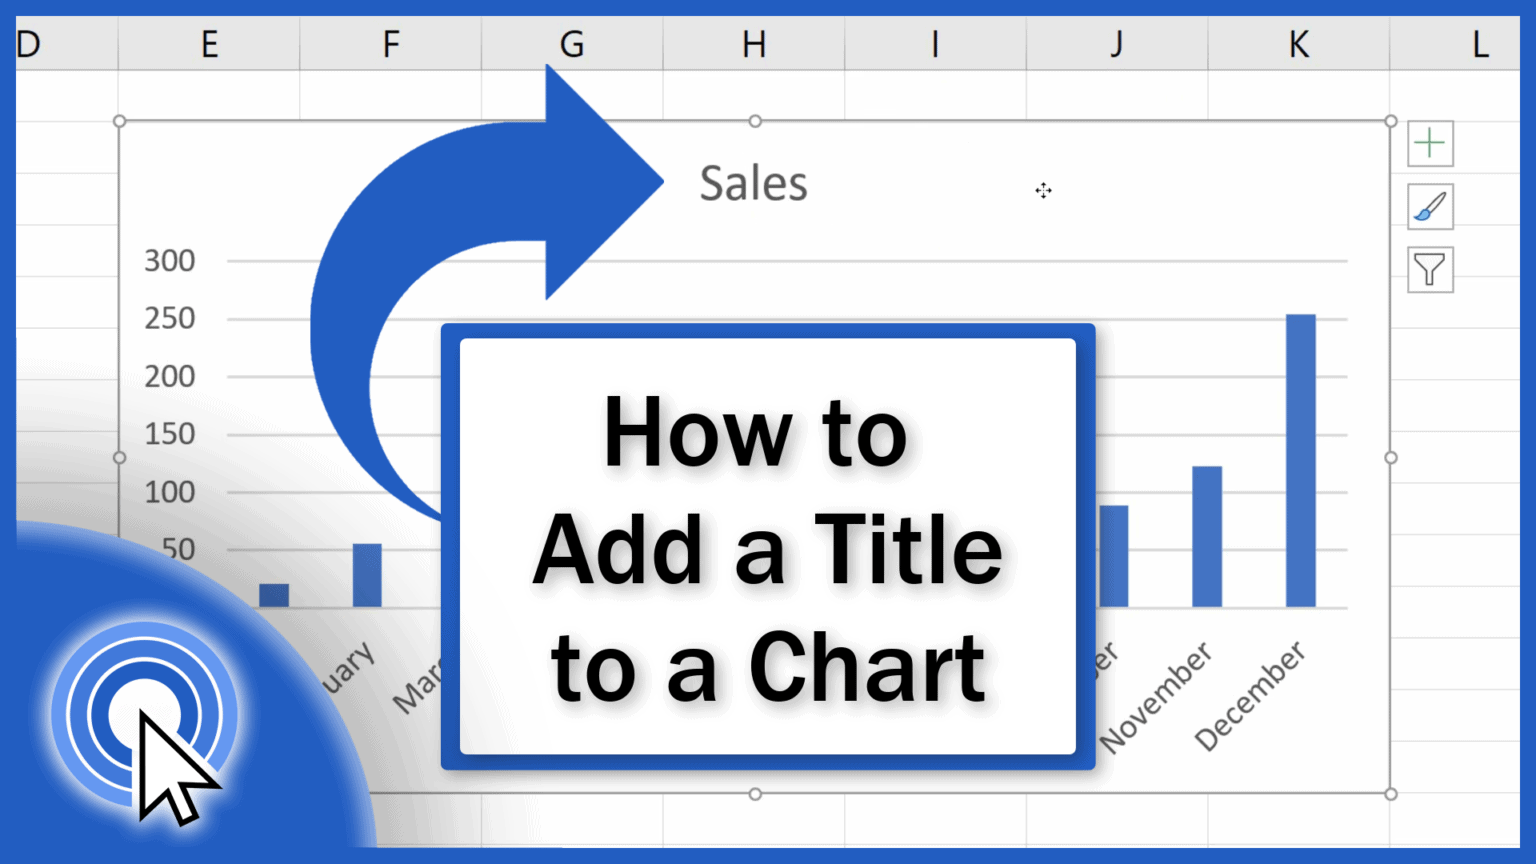 how-to-add-a-title-to-a-chart-in-excel-in-3-easy-clicks